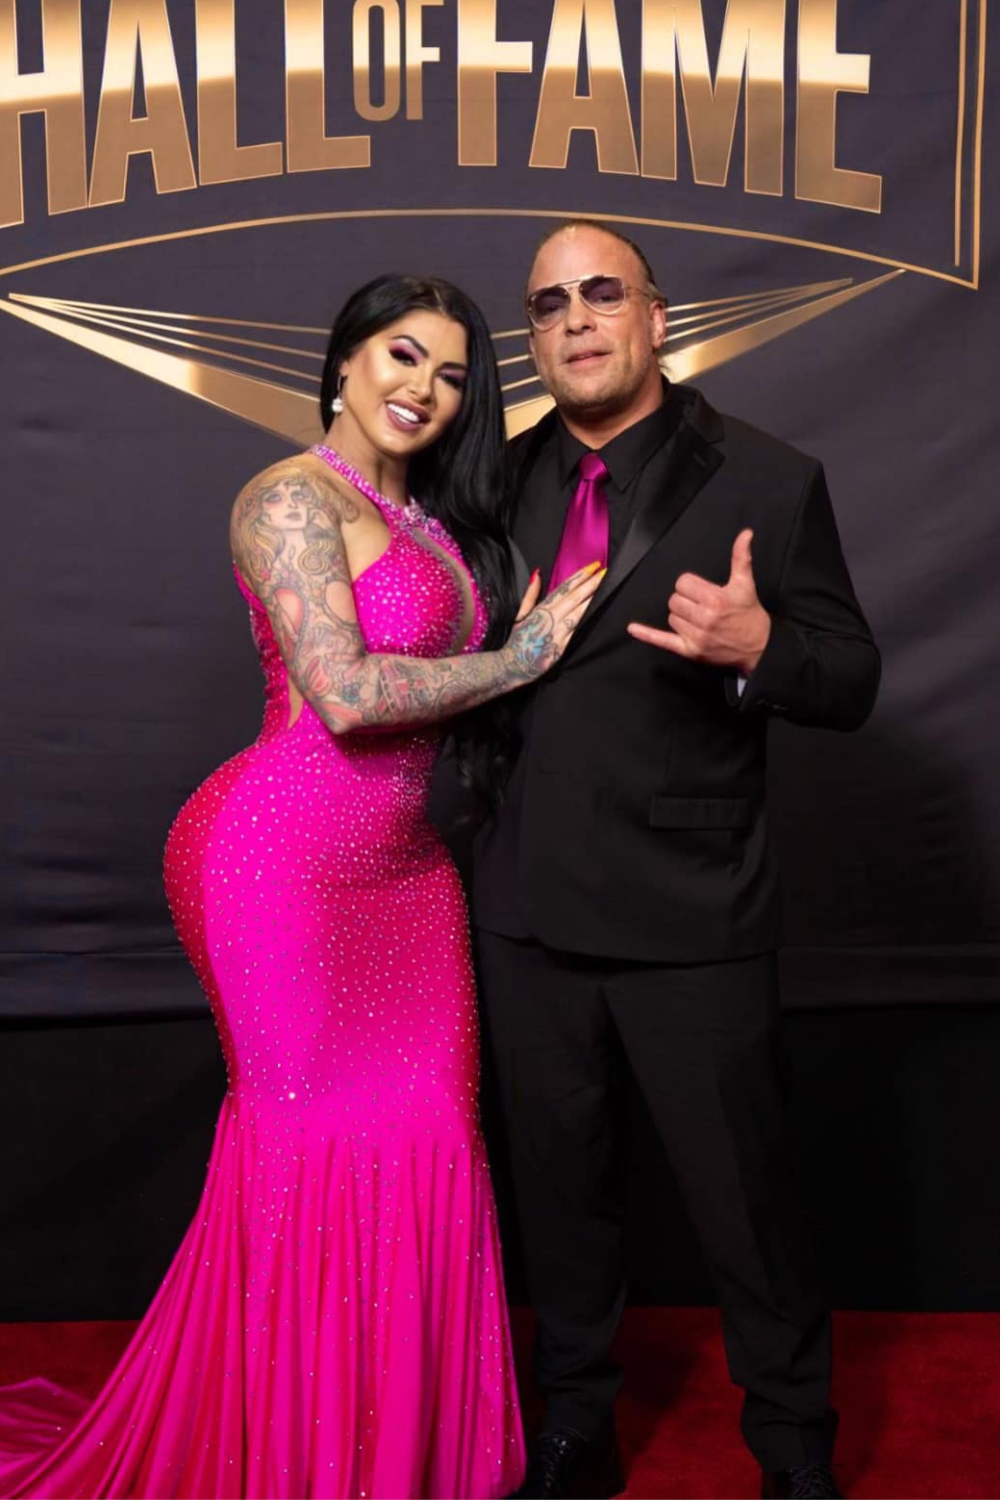 Rob Van Dam And Katie Forbes At The WWE Hall Of Fame Awards